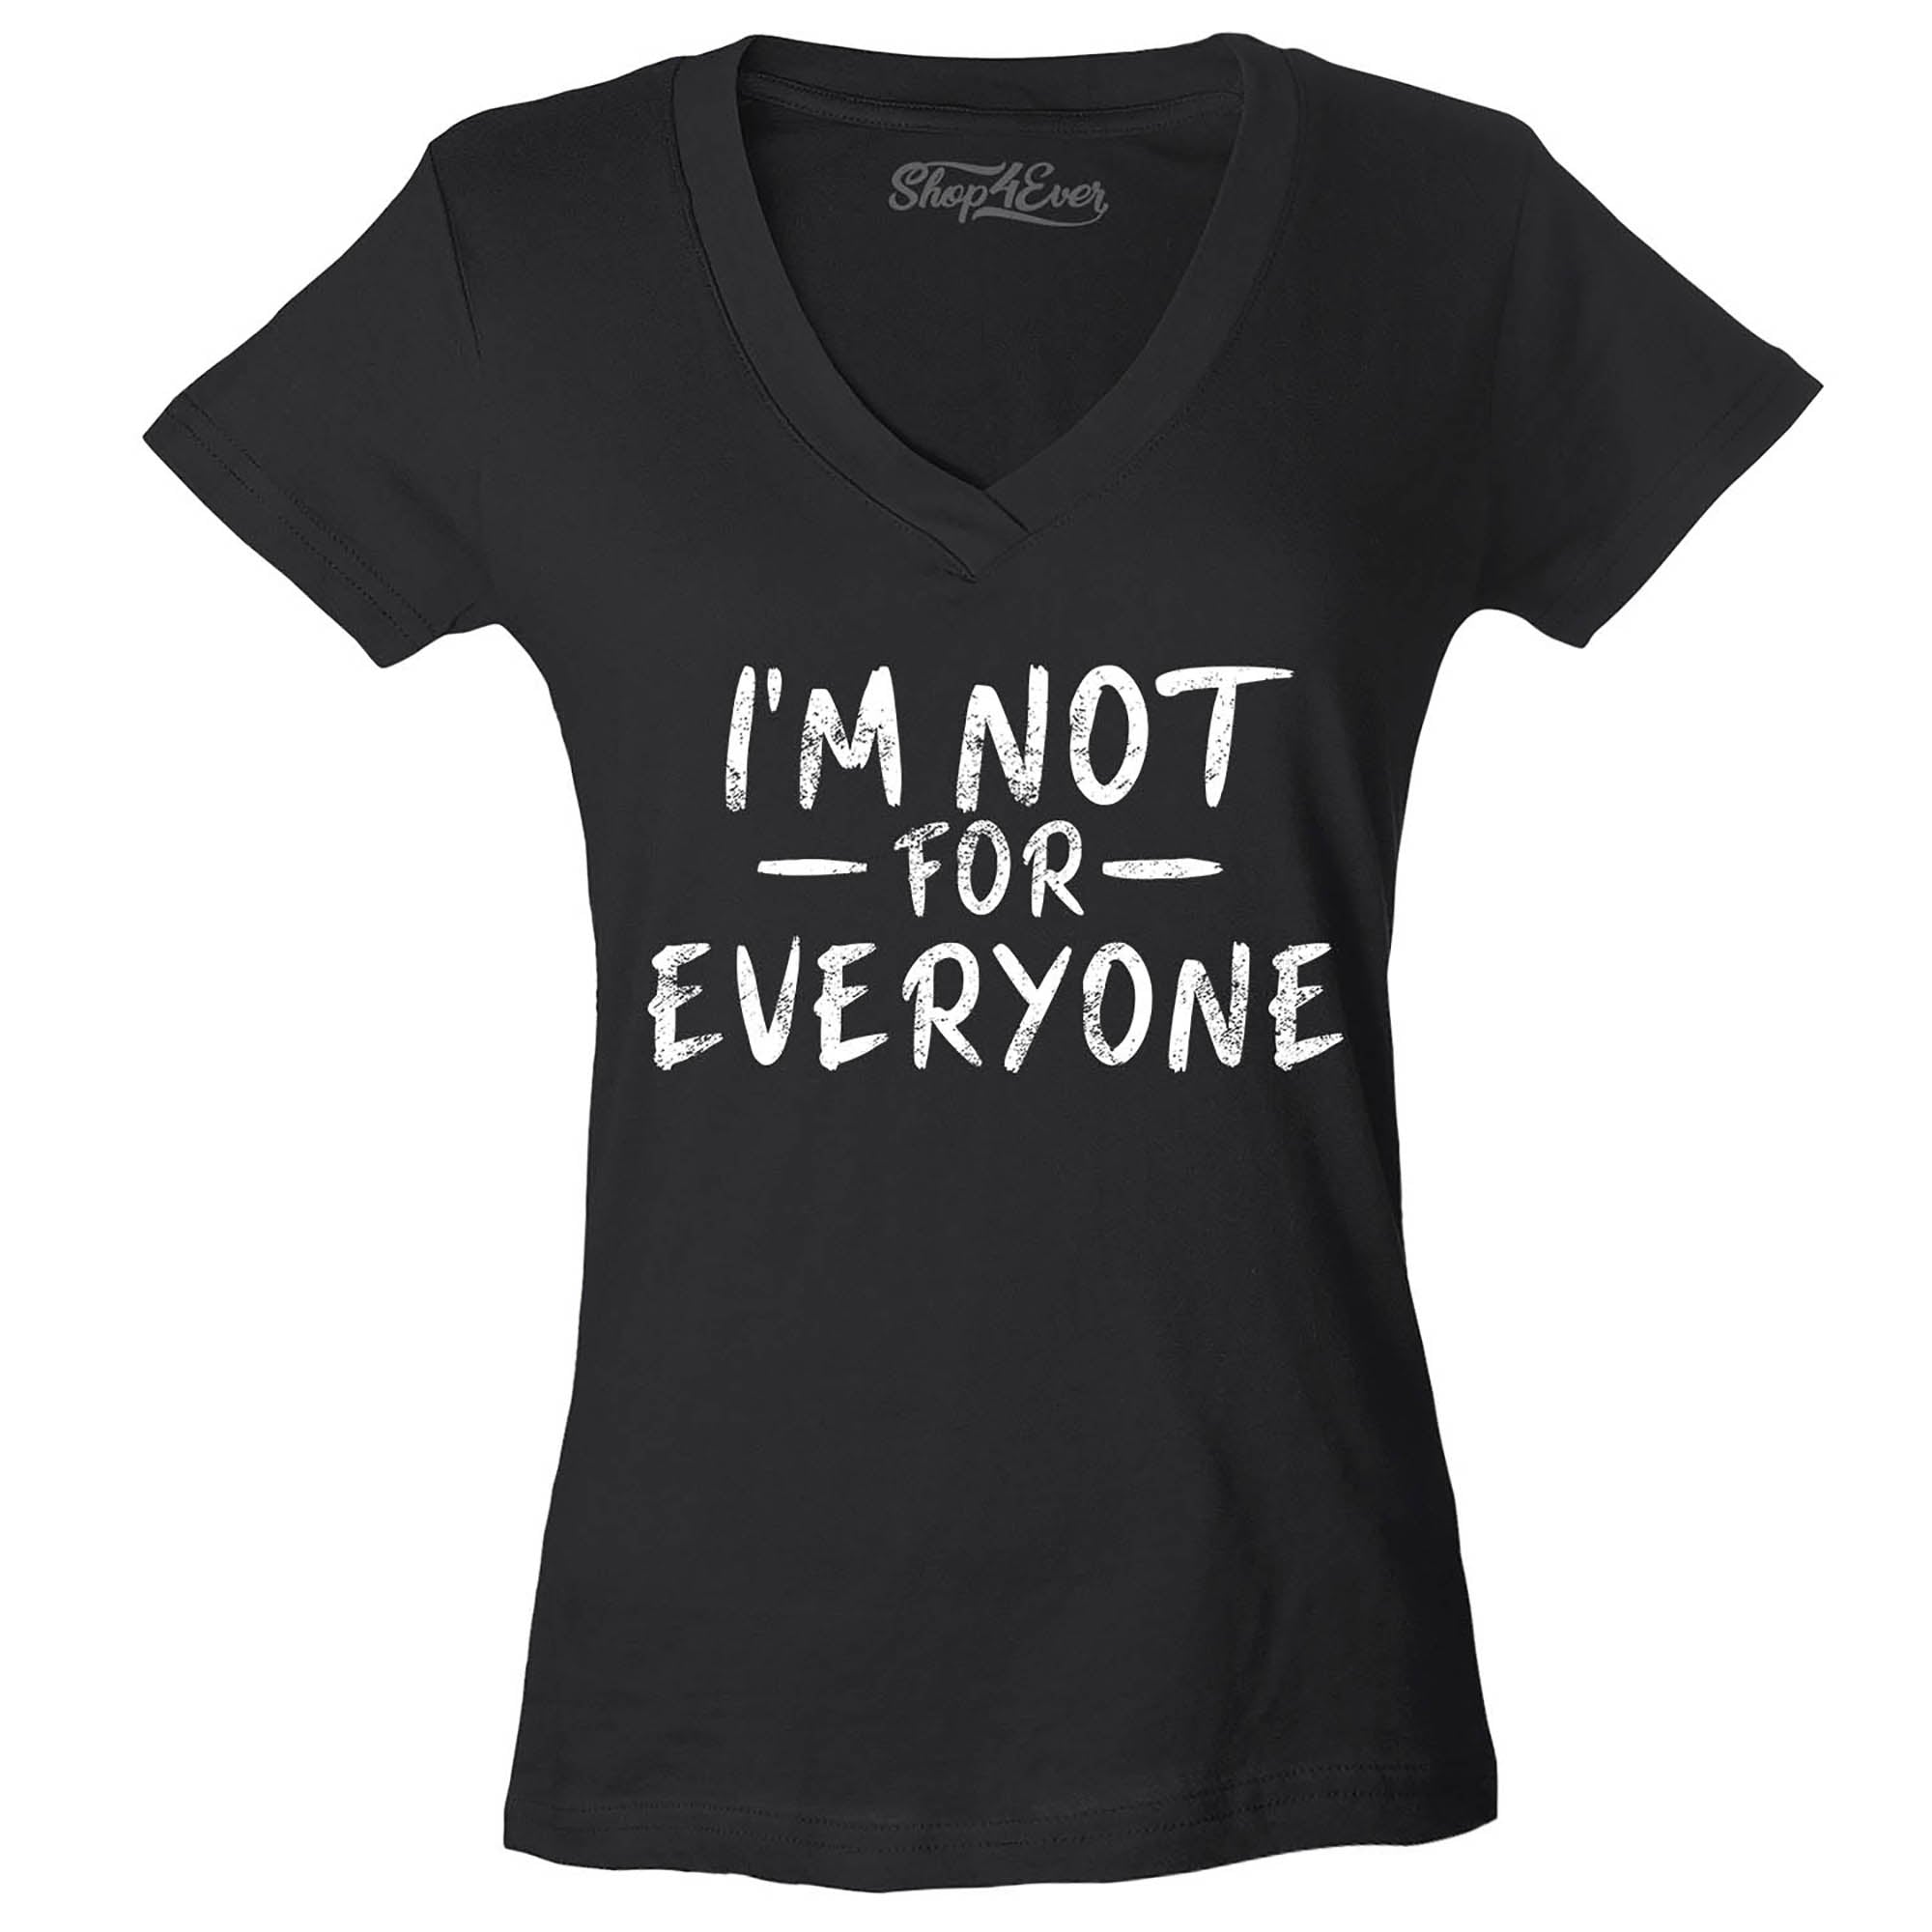 I'm Not for Everyone Women's V-Neck T-Shirt Slim Fit